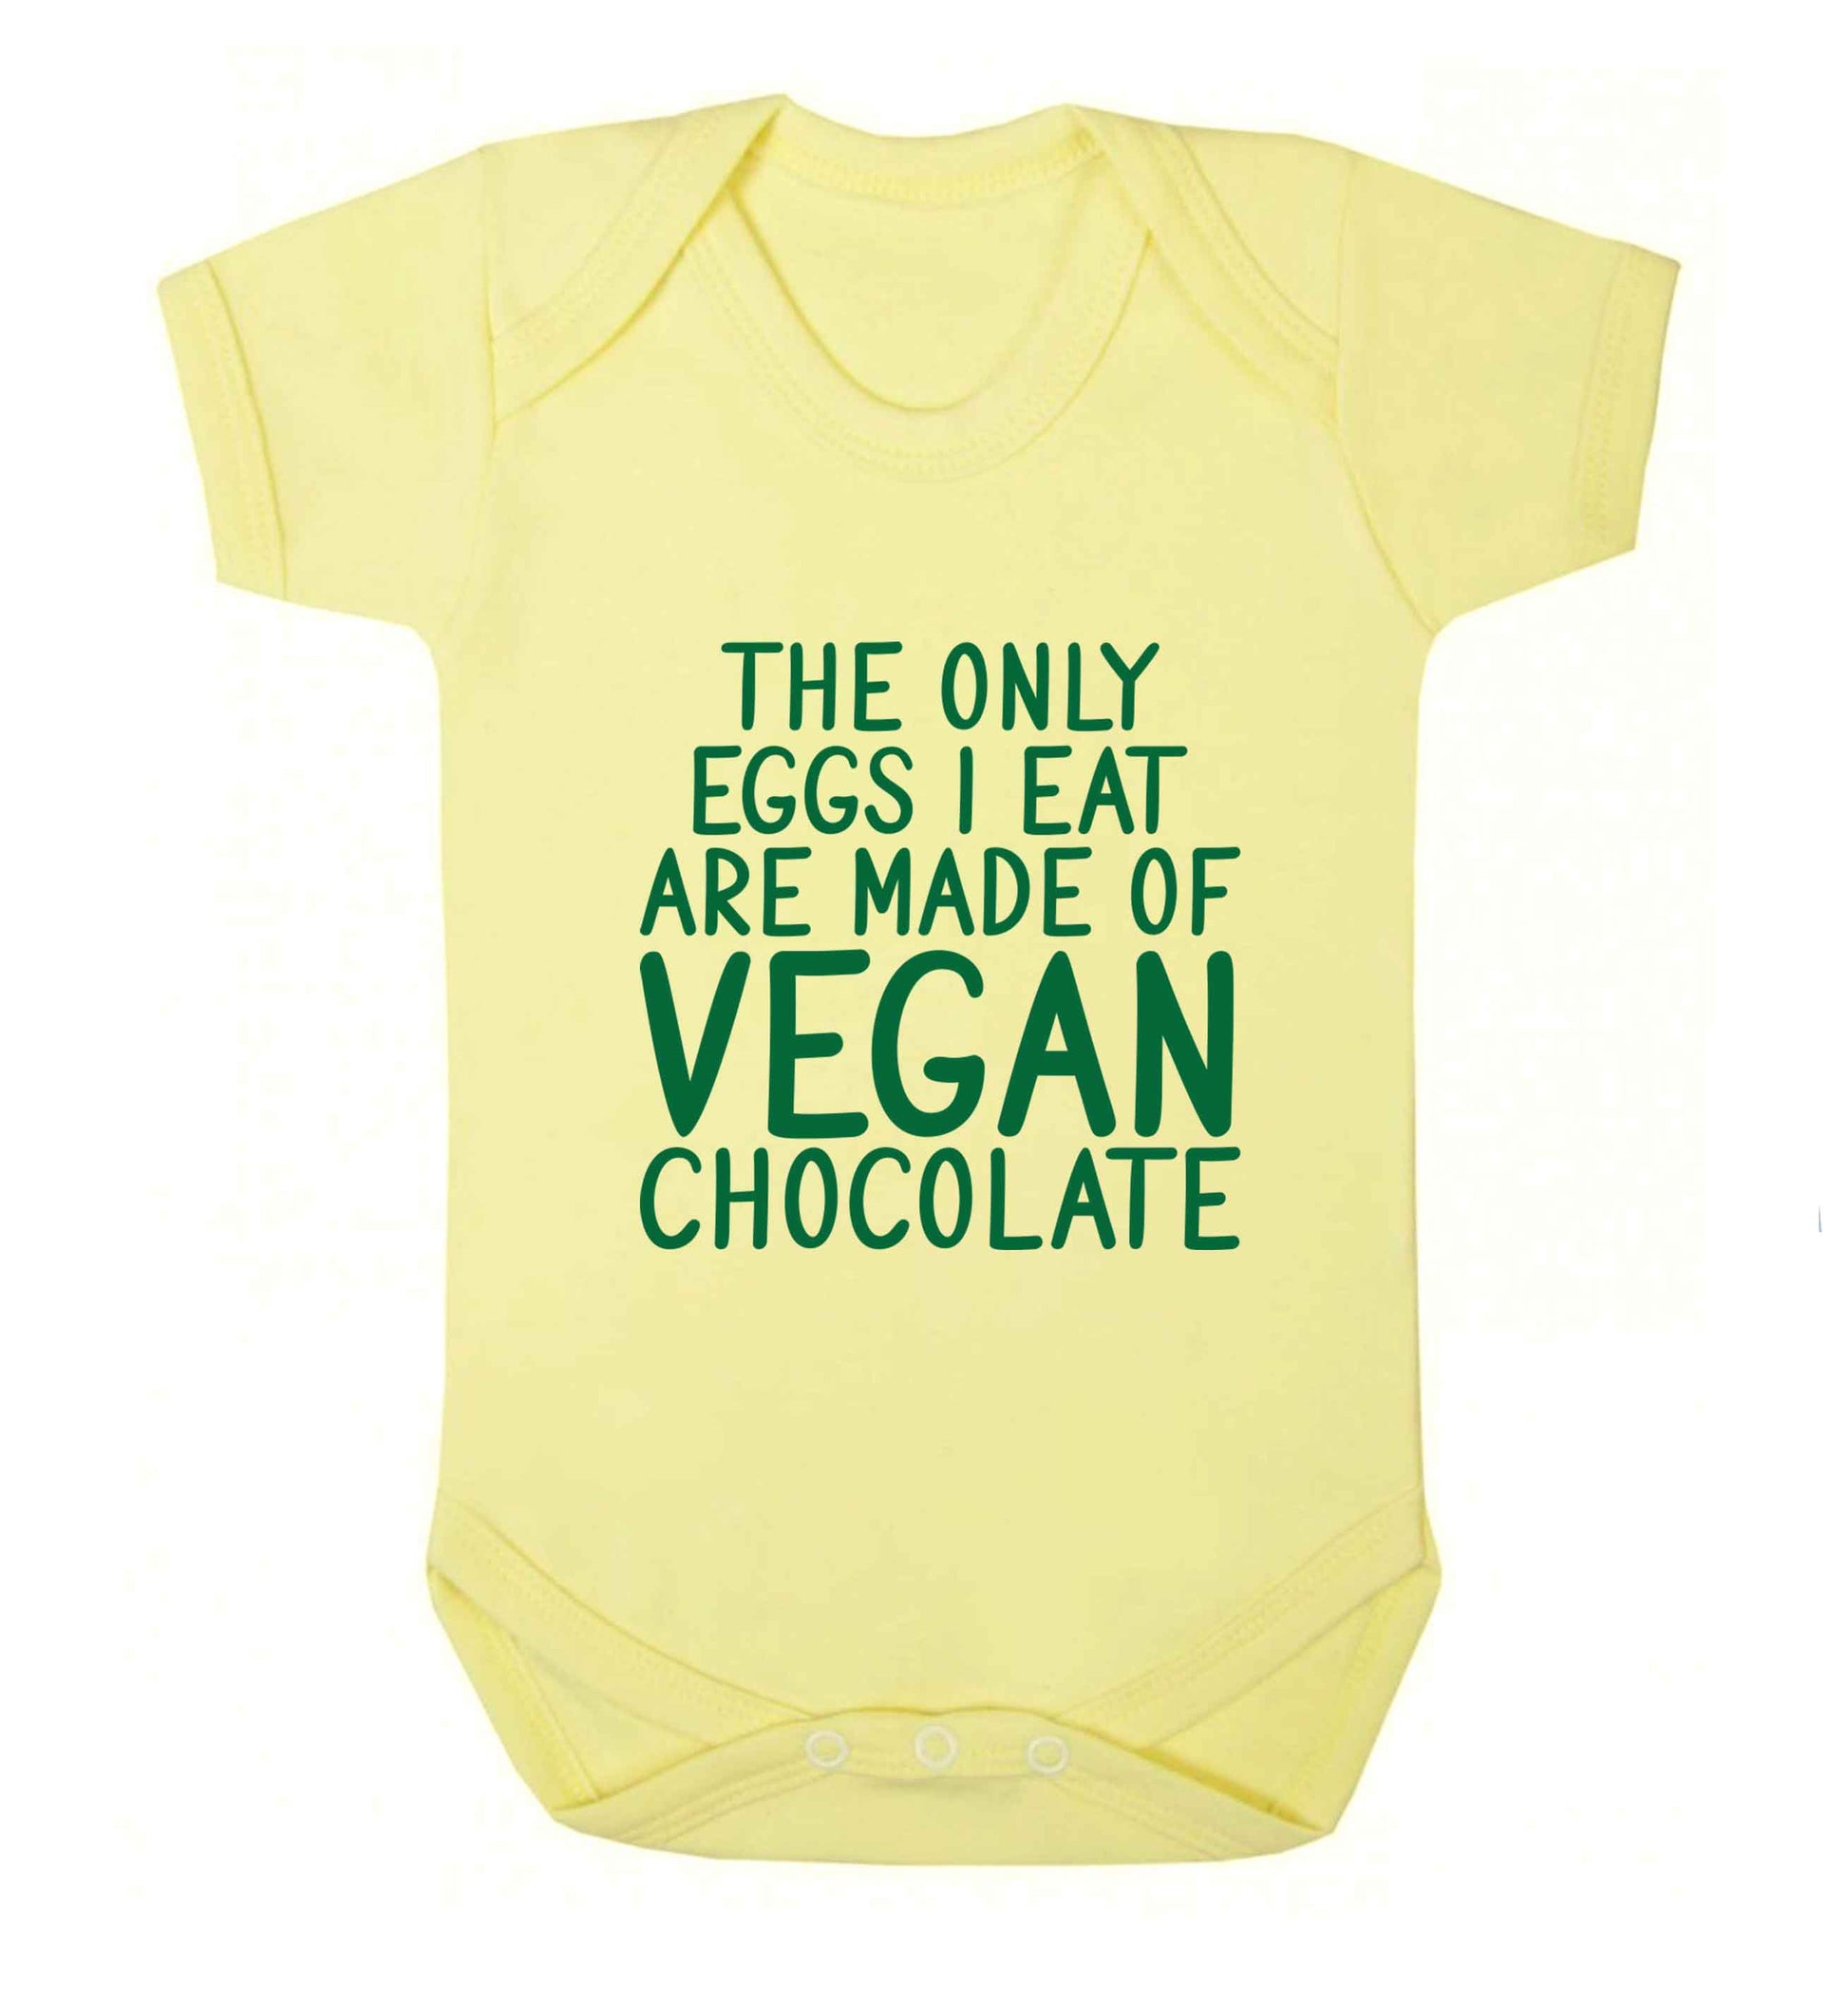 The only eggs I eat are made of vegan chocolate baby vest pale yellow 18-24 months